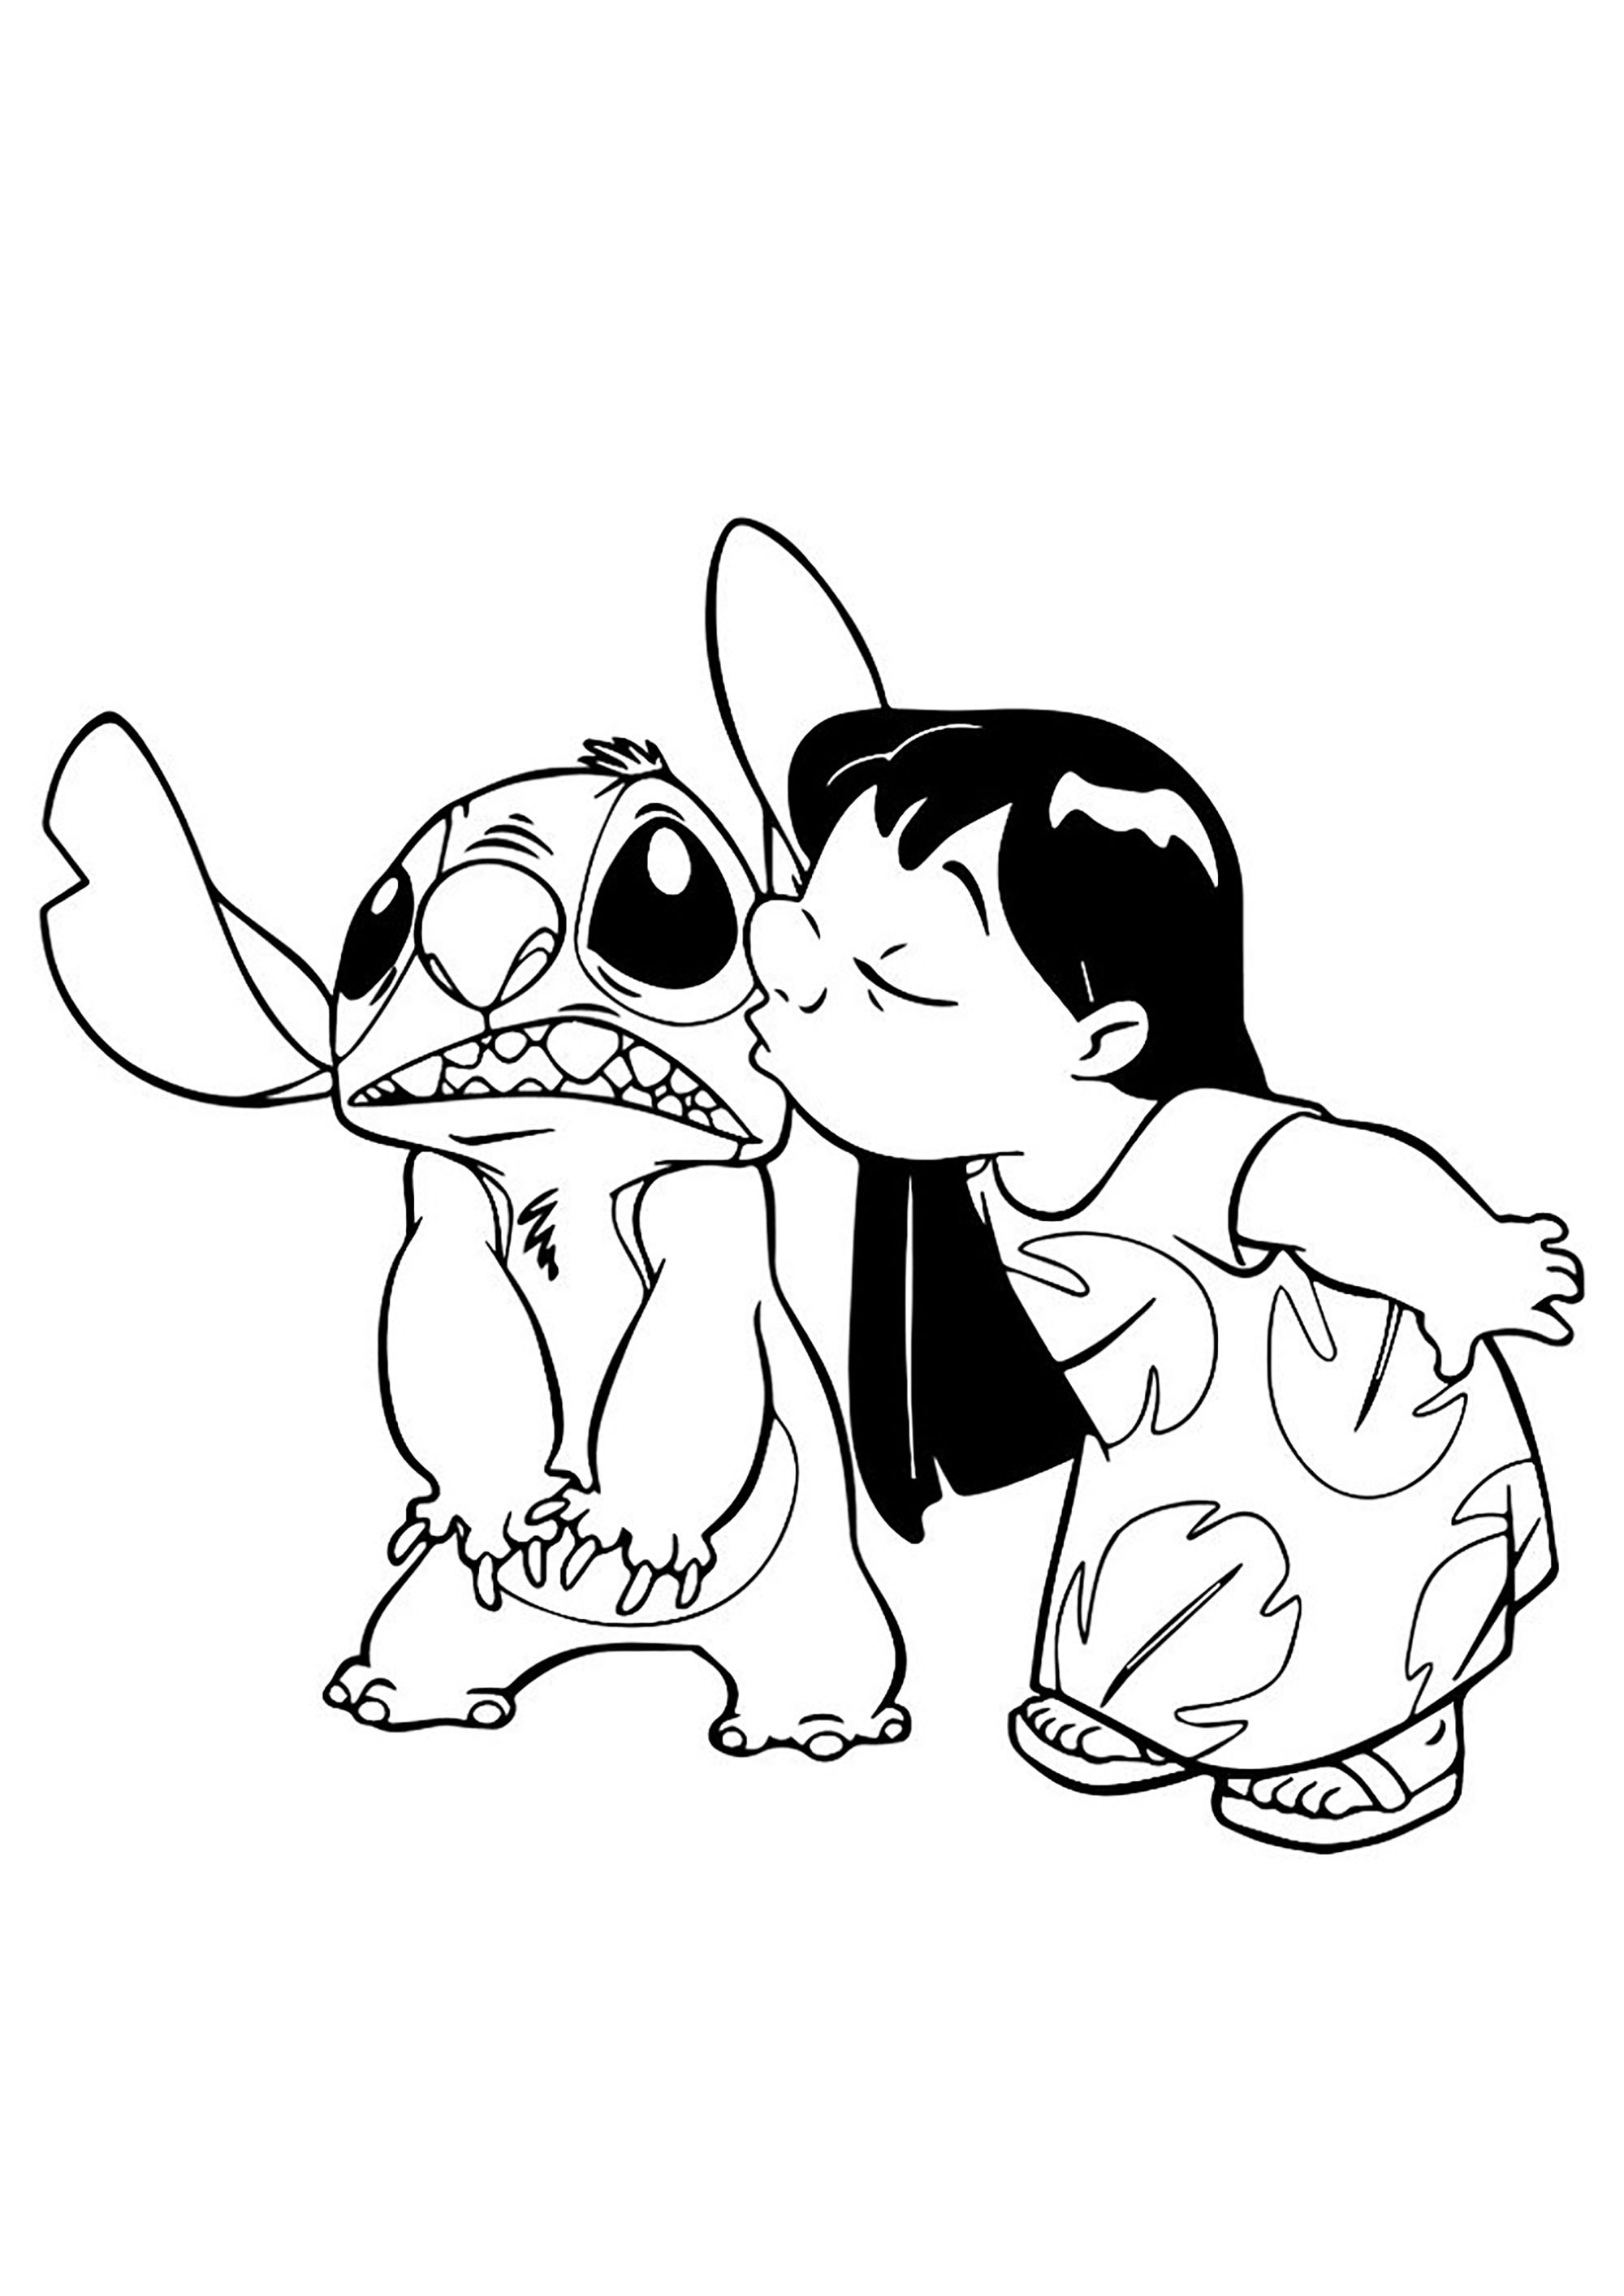 Lilo and stich coloring for children - Lilo And Stich Kids Coloring Pages